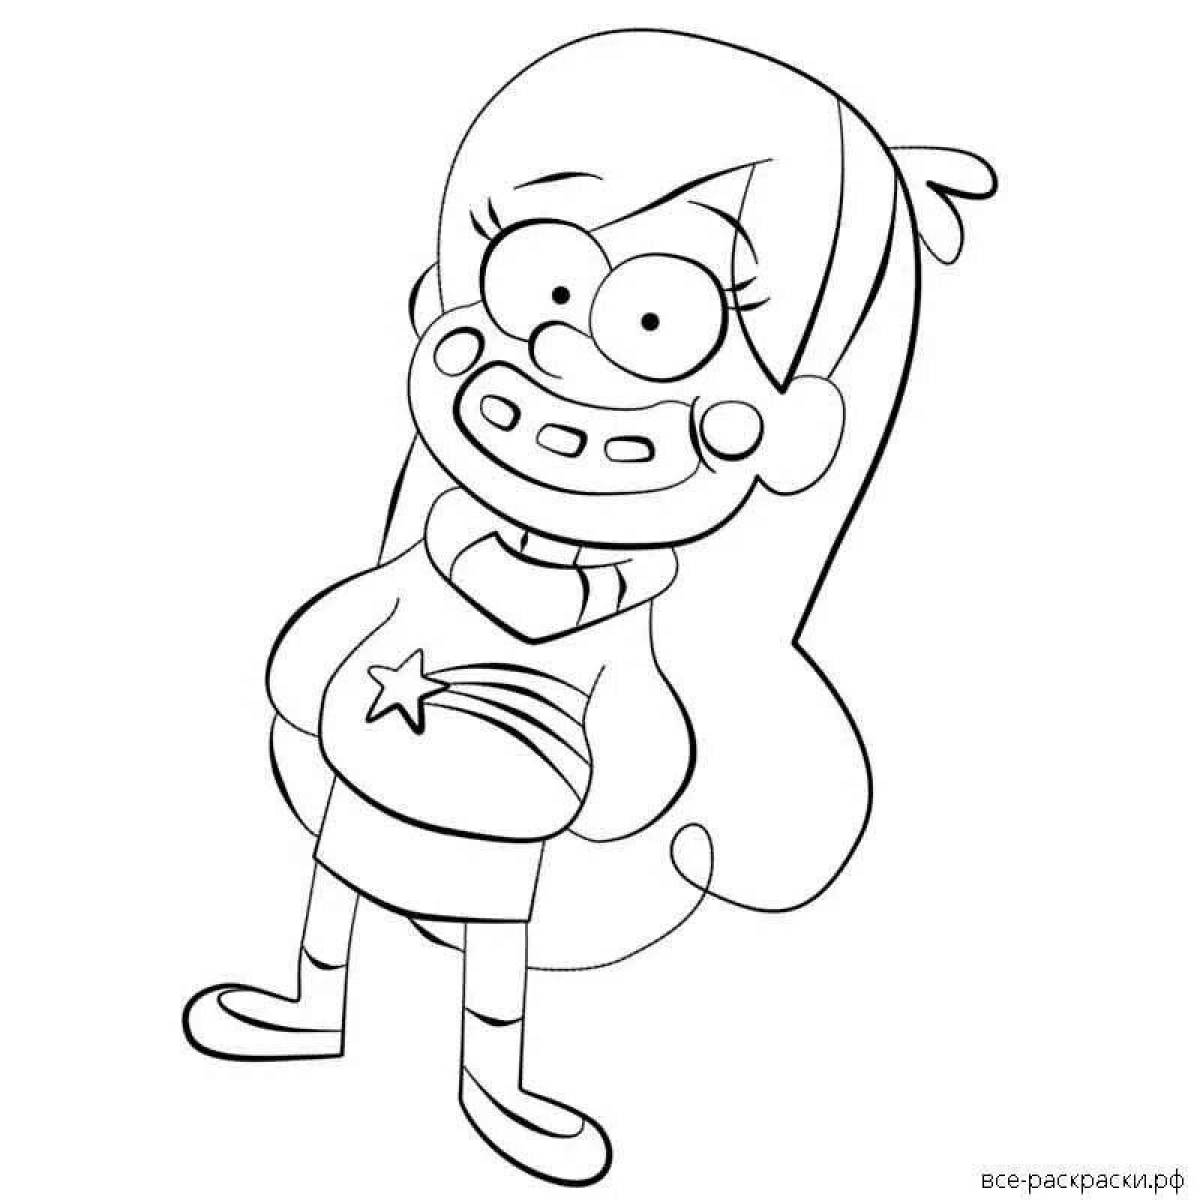 Amazing mabel coloring page